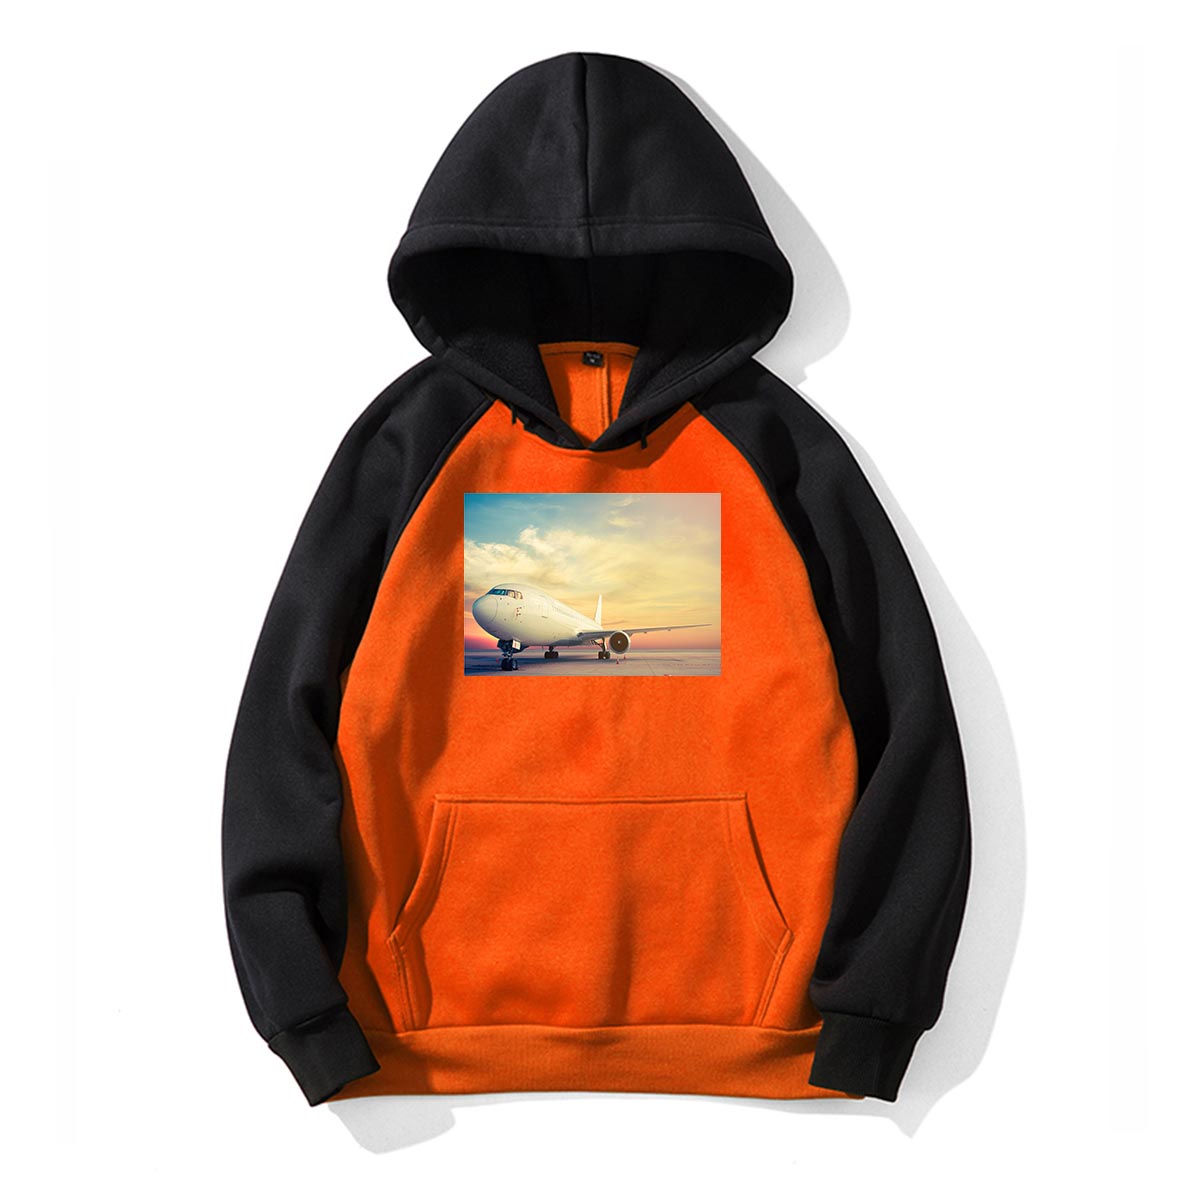 Old Airplane Parked During Sunset Designed Colourful Hoodies